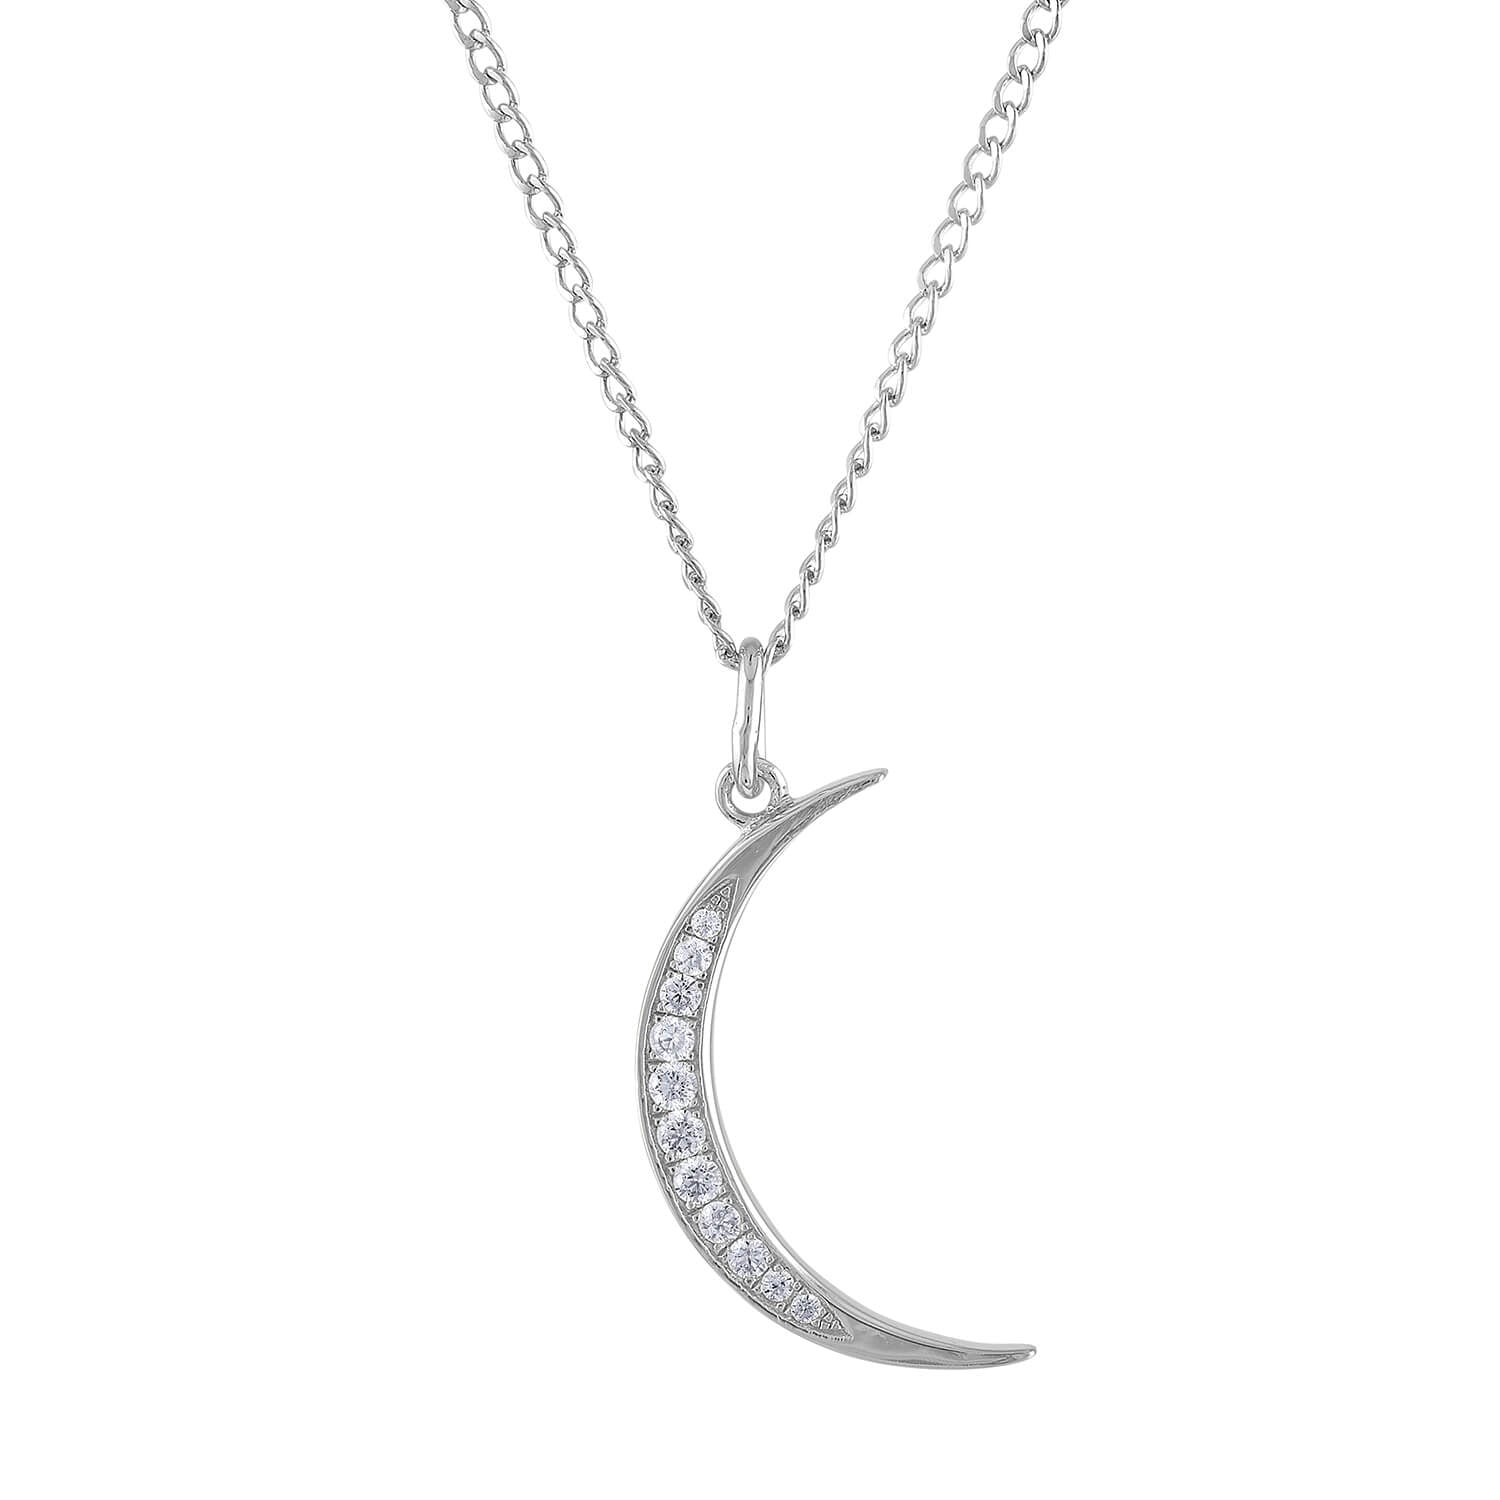 Pave Moon Charm Necklace in Sterling Silver